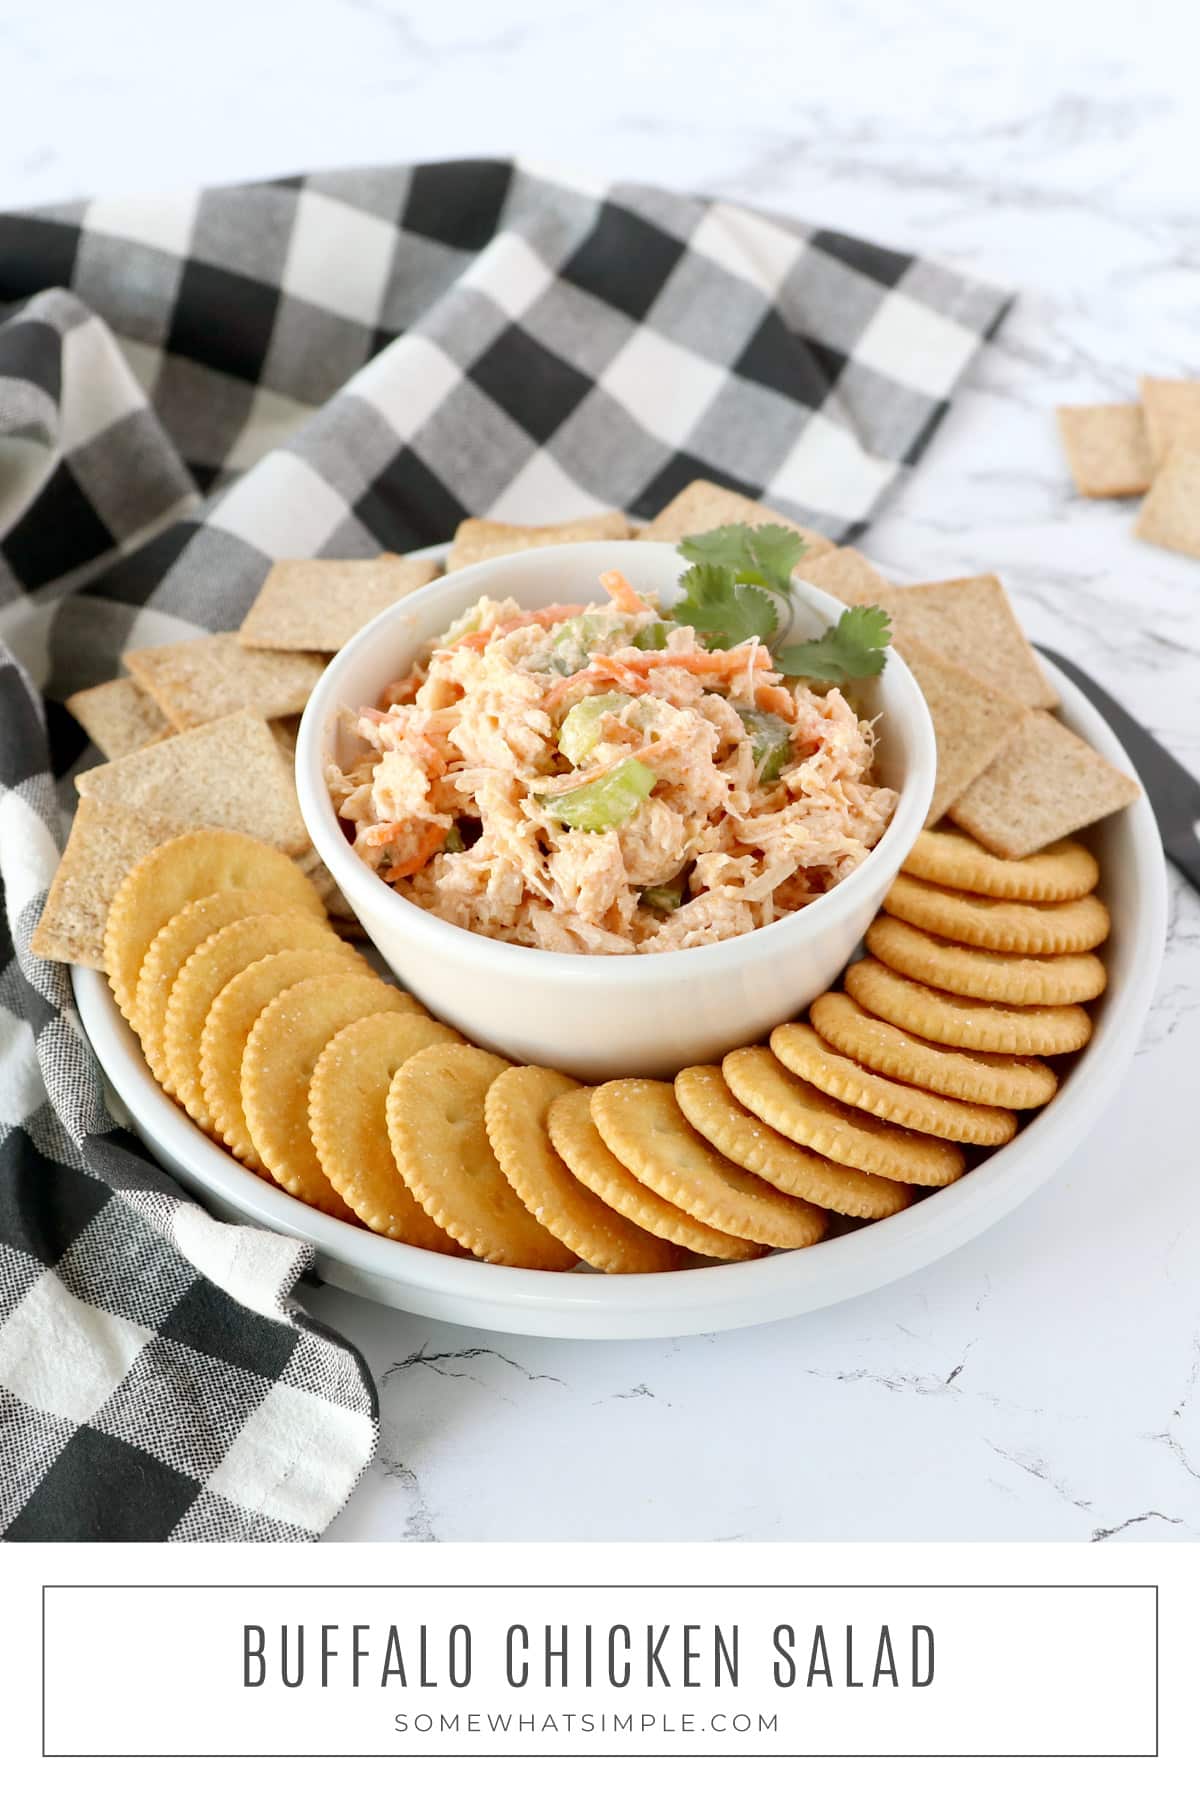 This Buffalo Chicken Salad is a healthy tossed salad that’s great for picnics, potlucks, and for lunch and dinner! Make this recipe in under 5 minutes! via @somewhatsimple